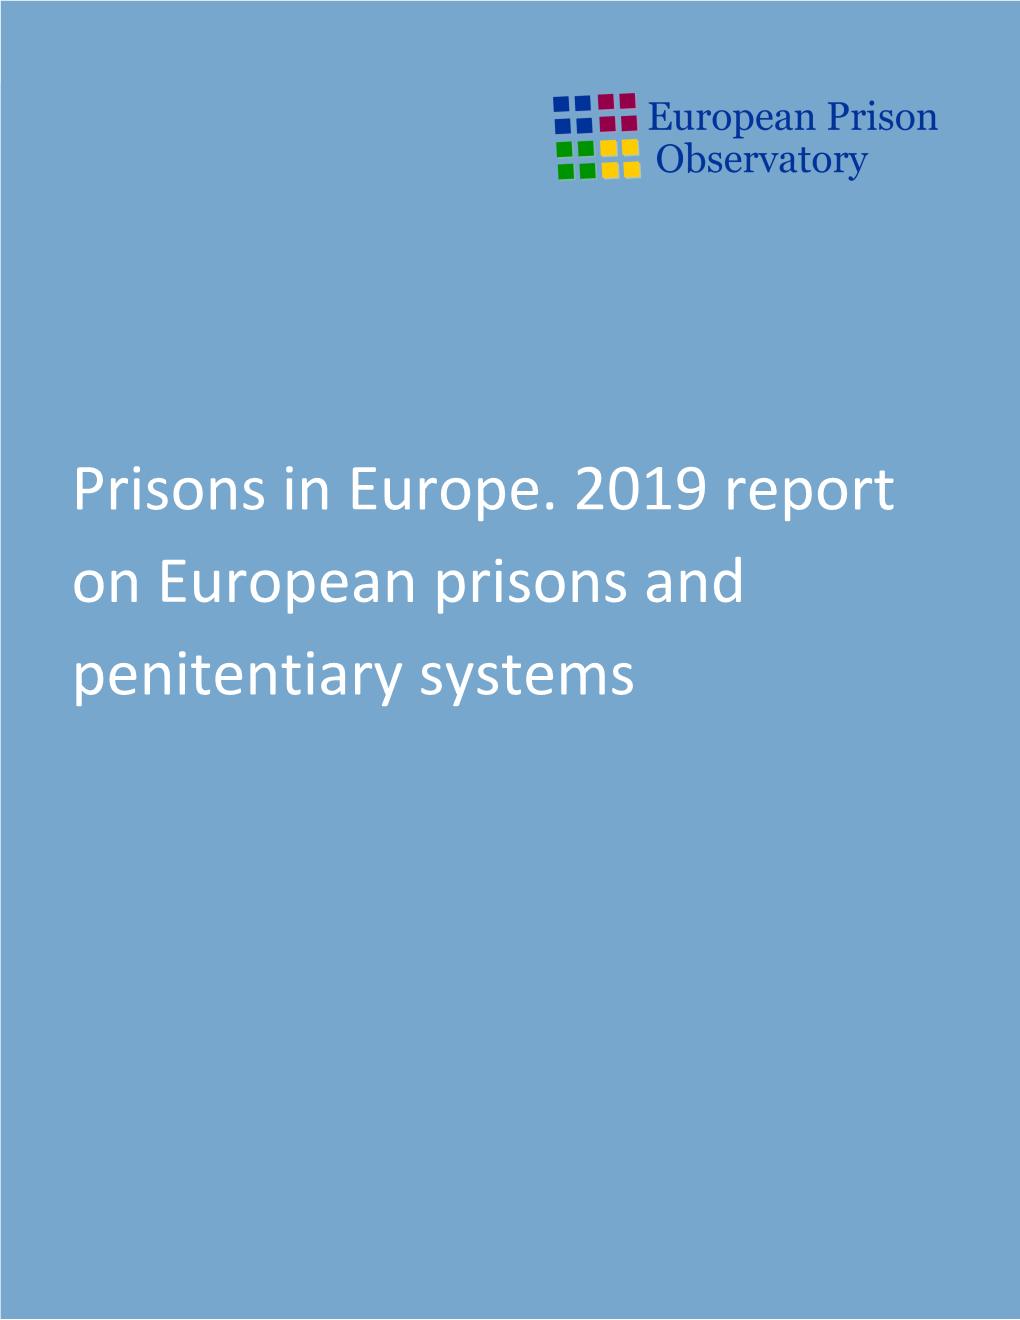 Prisons in Europe. 2019 Report on European Prisons and Penitentiary Systems